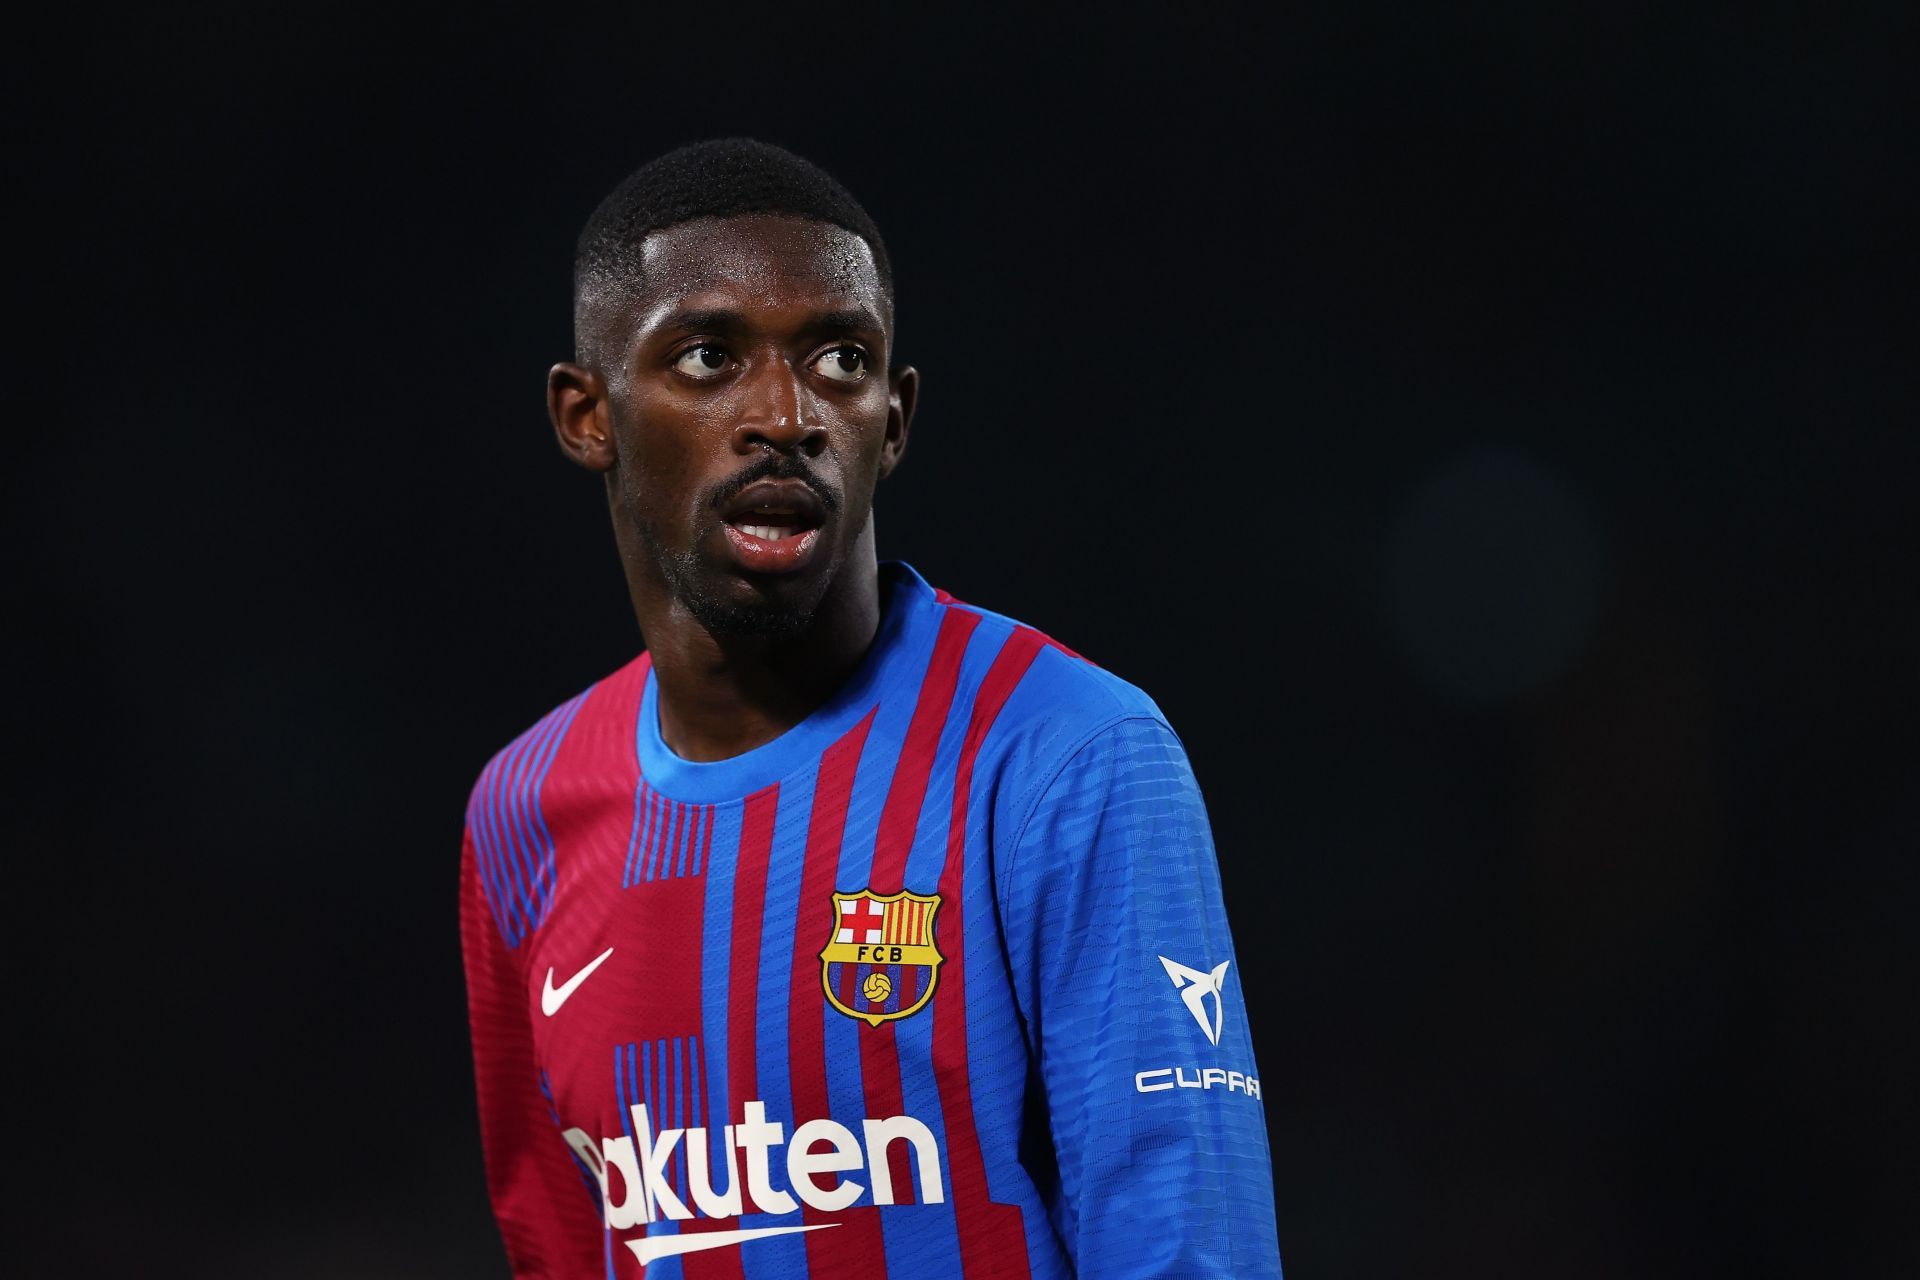 Could Ousmane Dembele be playing in the Premier League next season?